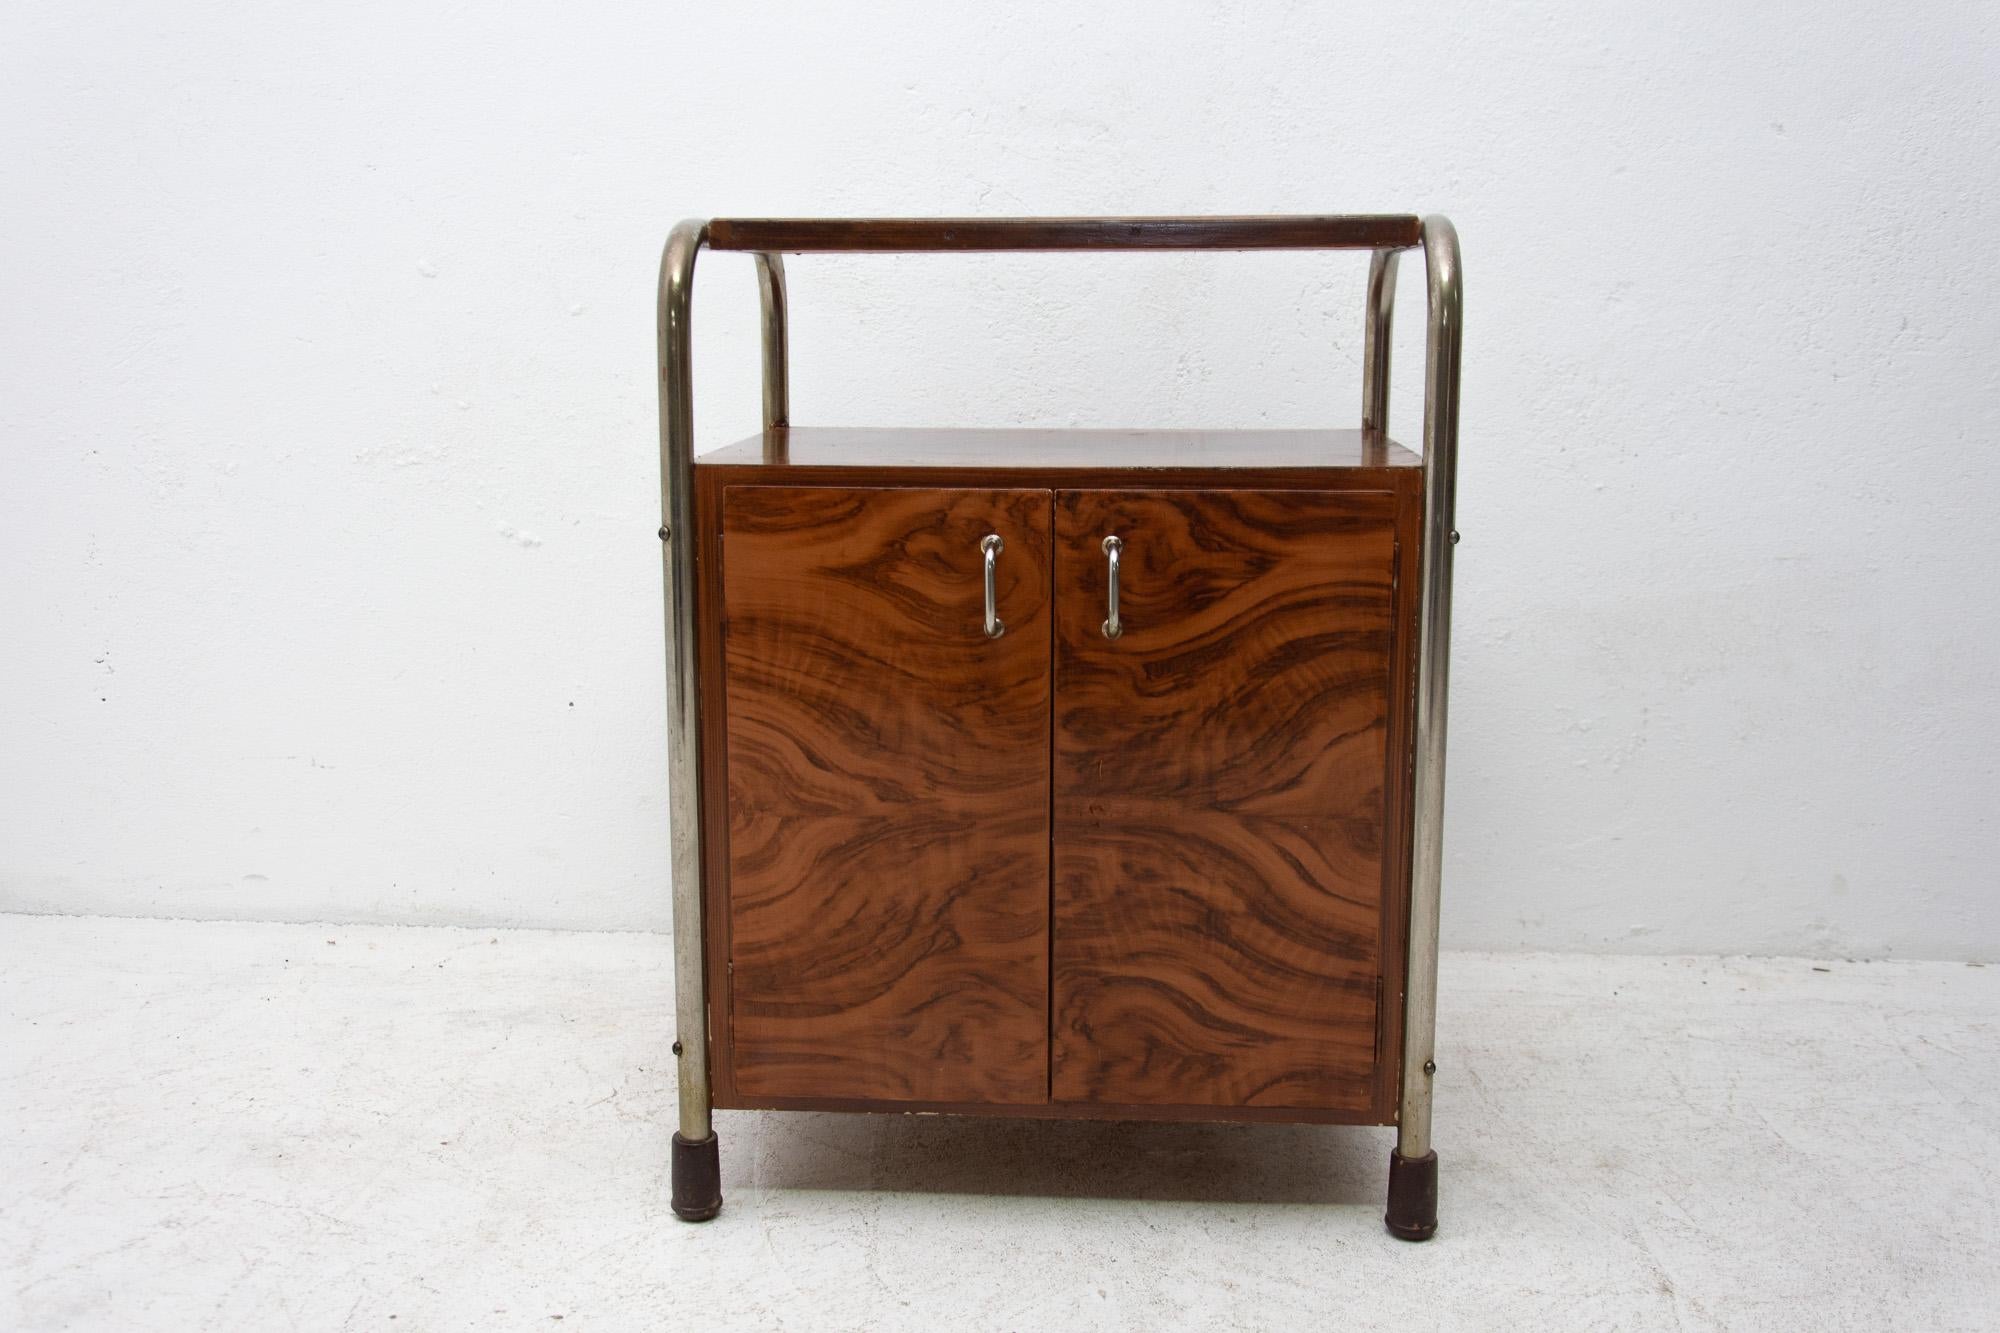 Bohemian chromed side table or nightstand in polished walnut was made in the 1930s. It features a very simple and practical design. Standing on a chrome base. It´s a nice example of Central European functionalist furniture design. The cabinet has